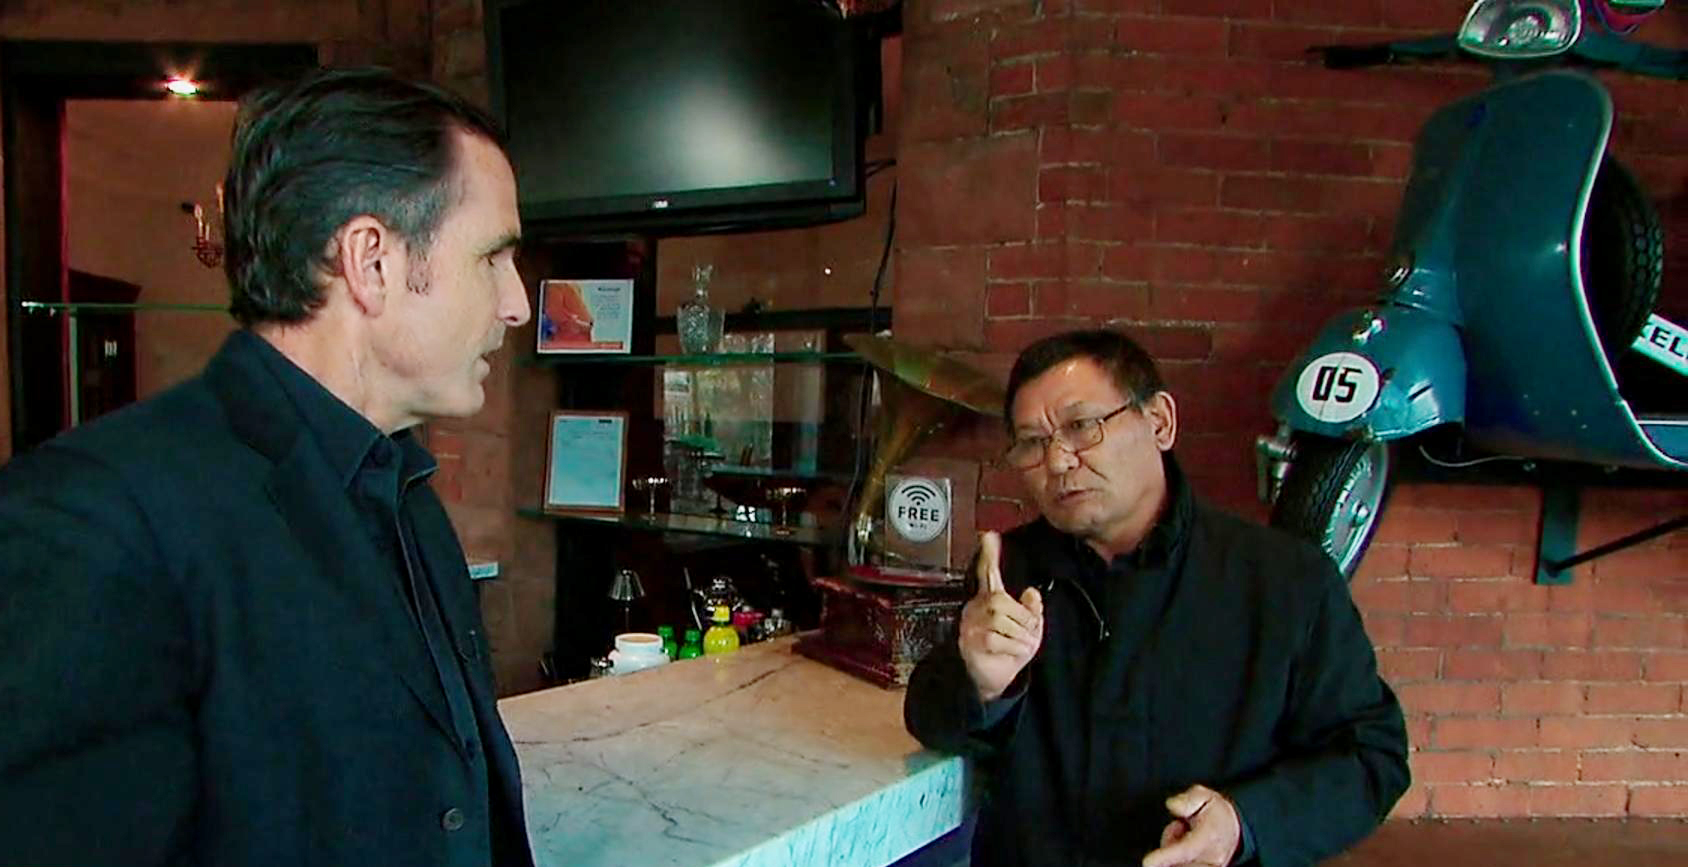 PHOTO: Lee Young-guk, an ex-bodyguard for North Korea’s former dictator Kim Jong Il, is seen here with ABC News' Bob Woodruff.